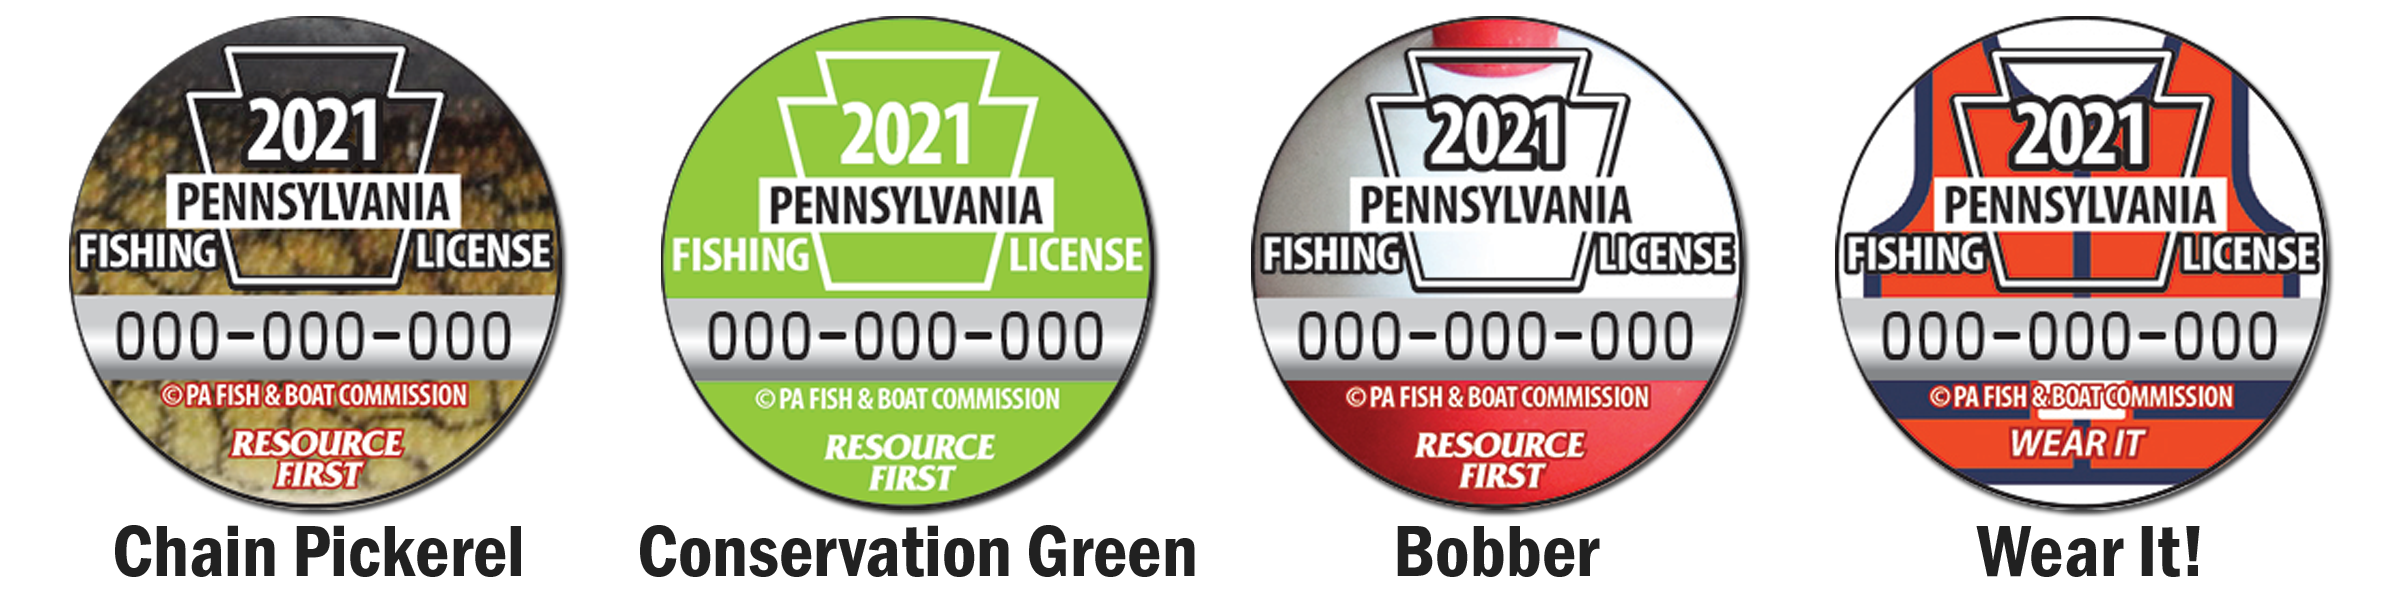 VOTE NOW FOR THE 2021 PENNSYLVANIA FISHING LICENSE BUTTON DESIGN!